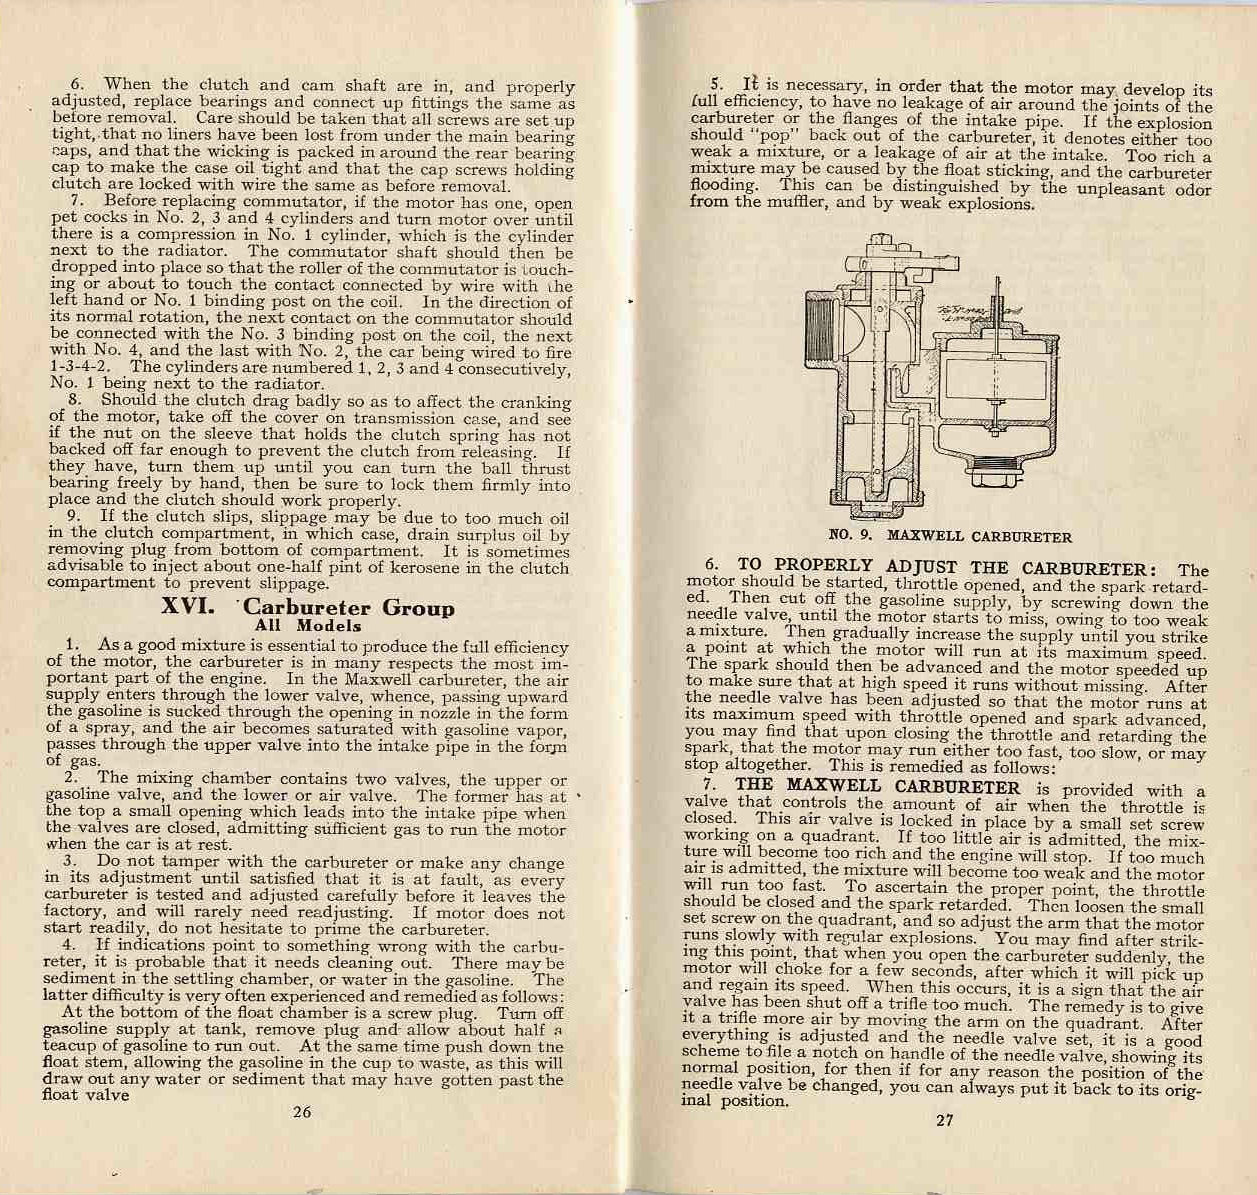 1909 Maxwell Instructions-26-27